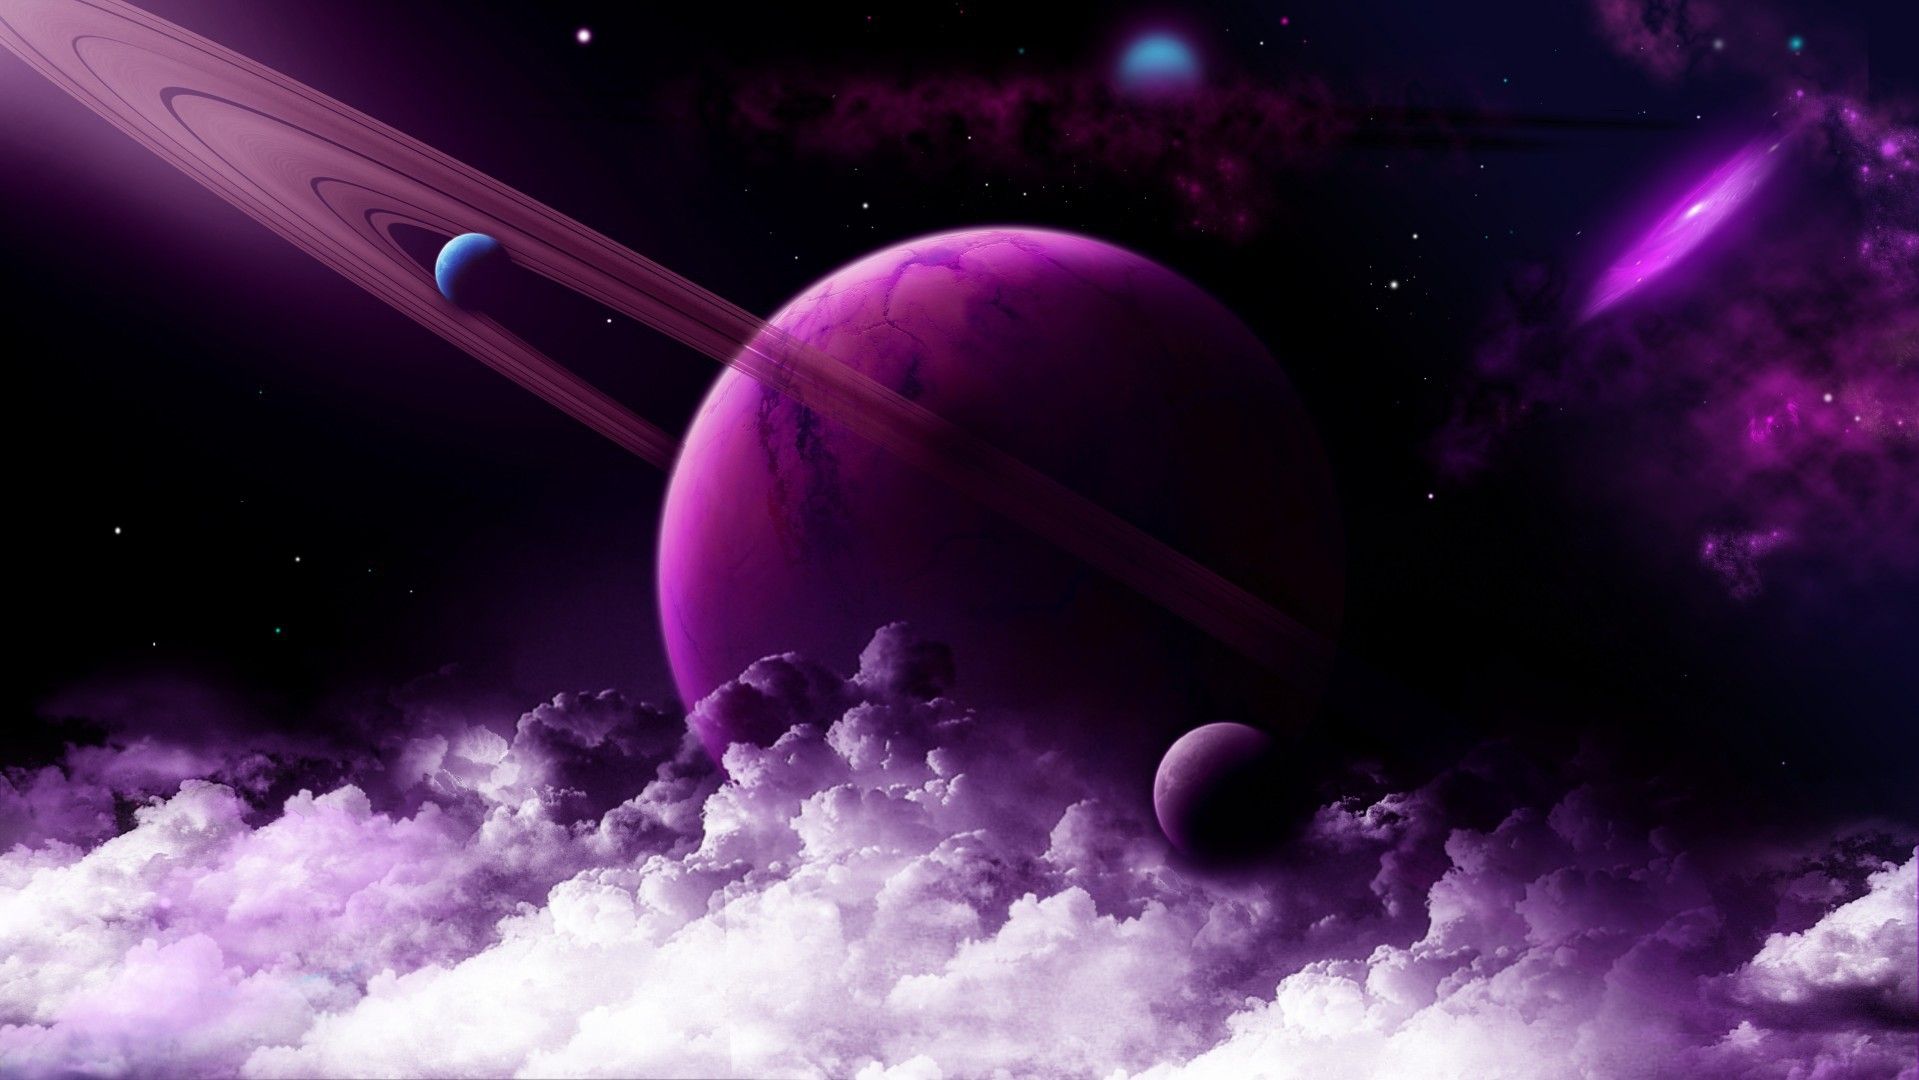 Purple space wallpapers and images - wallpapers, pictures, photos